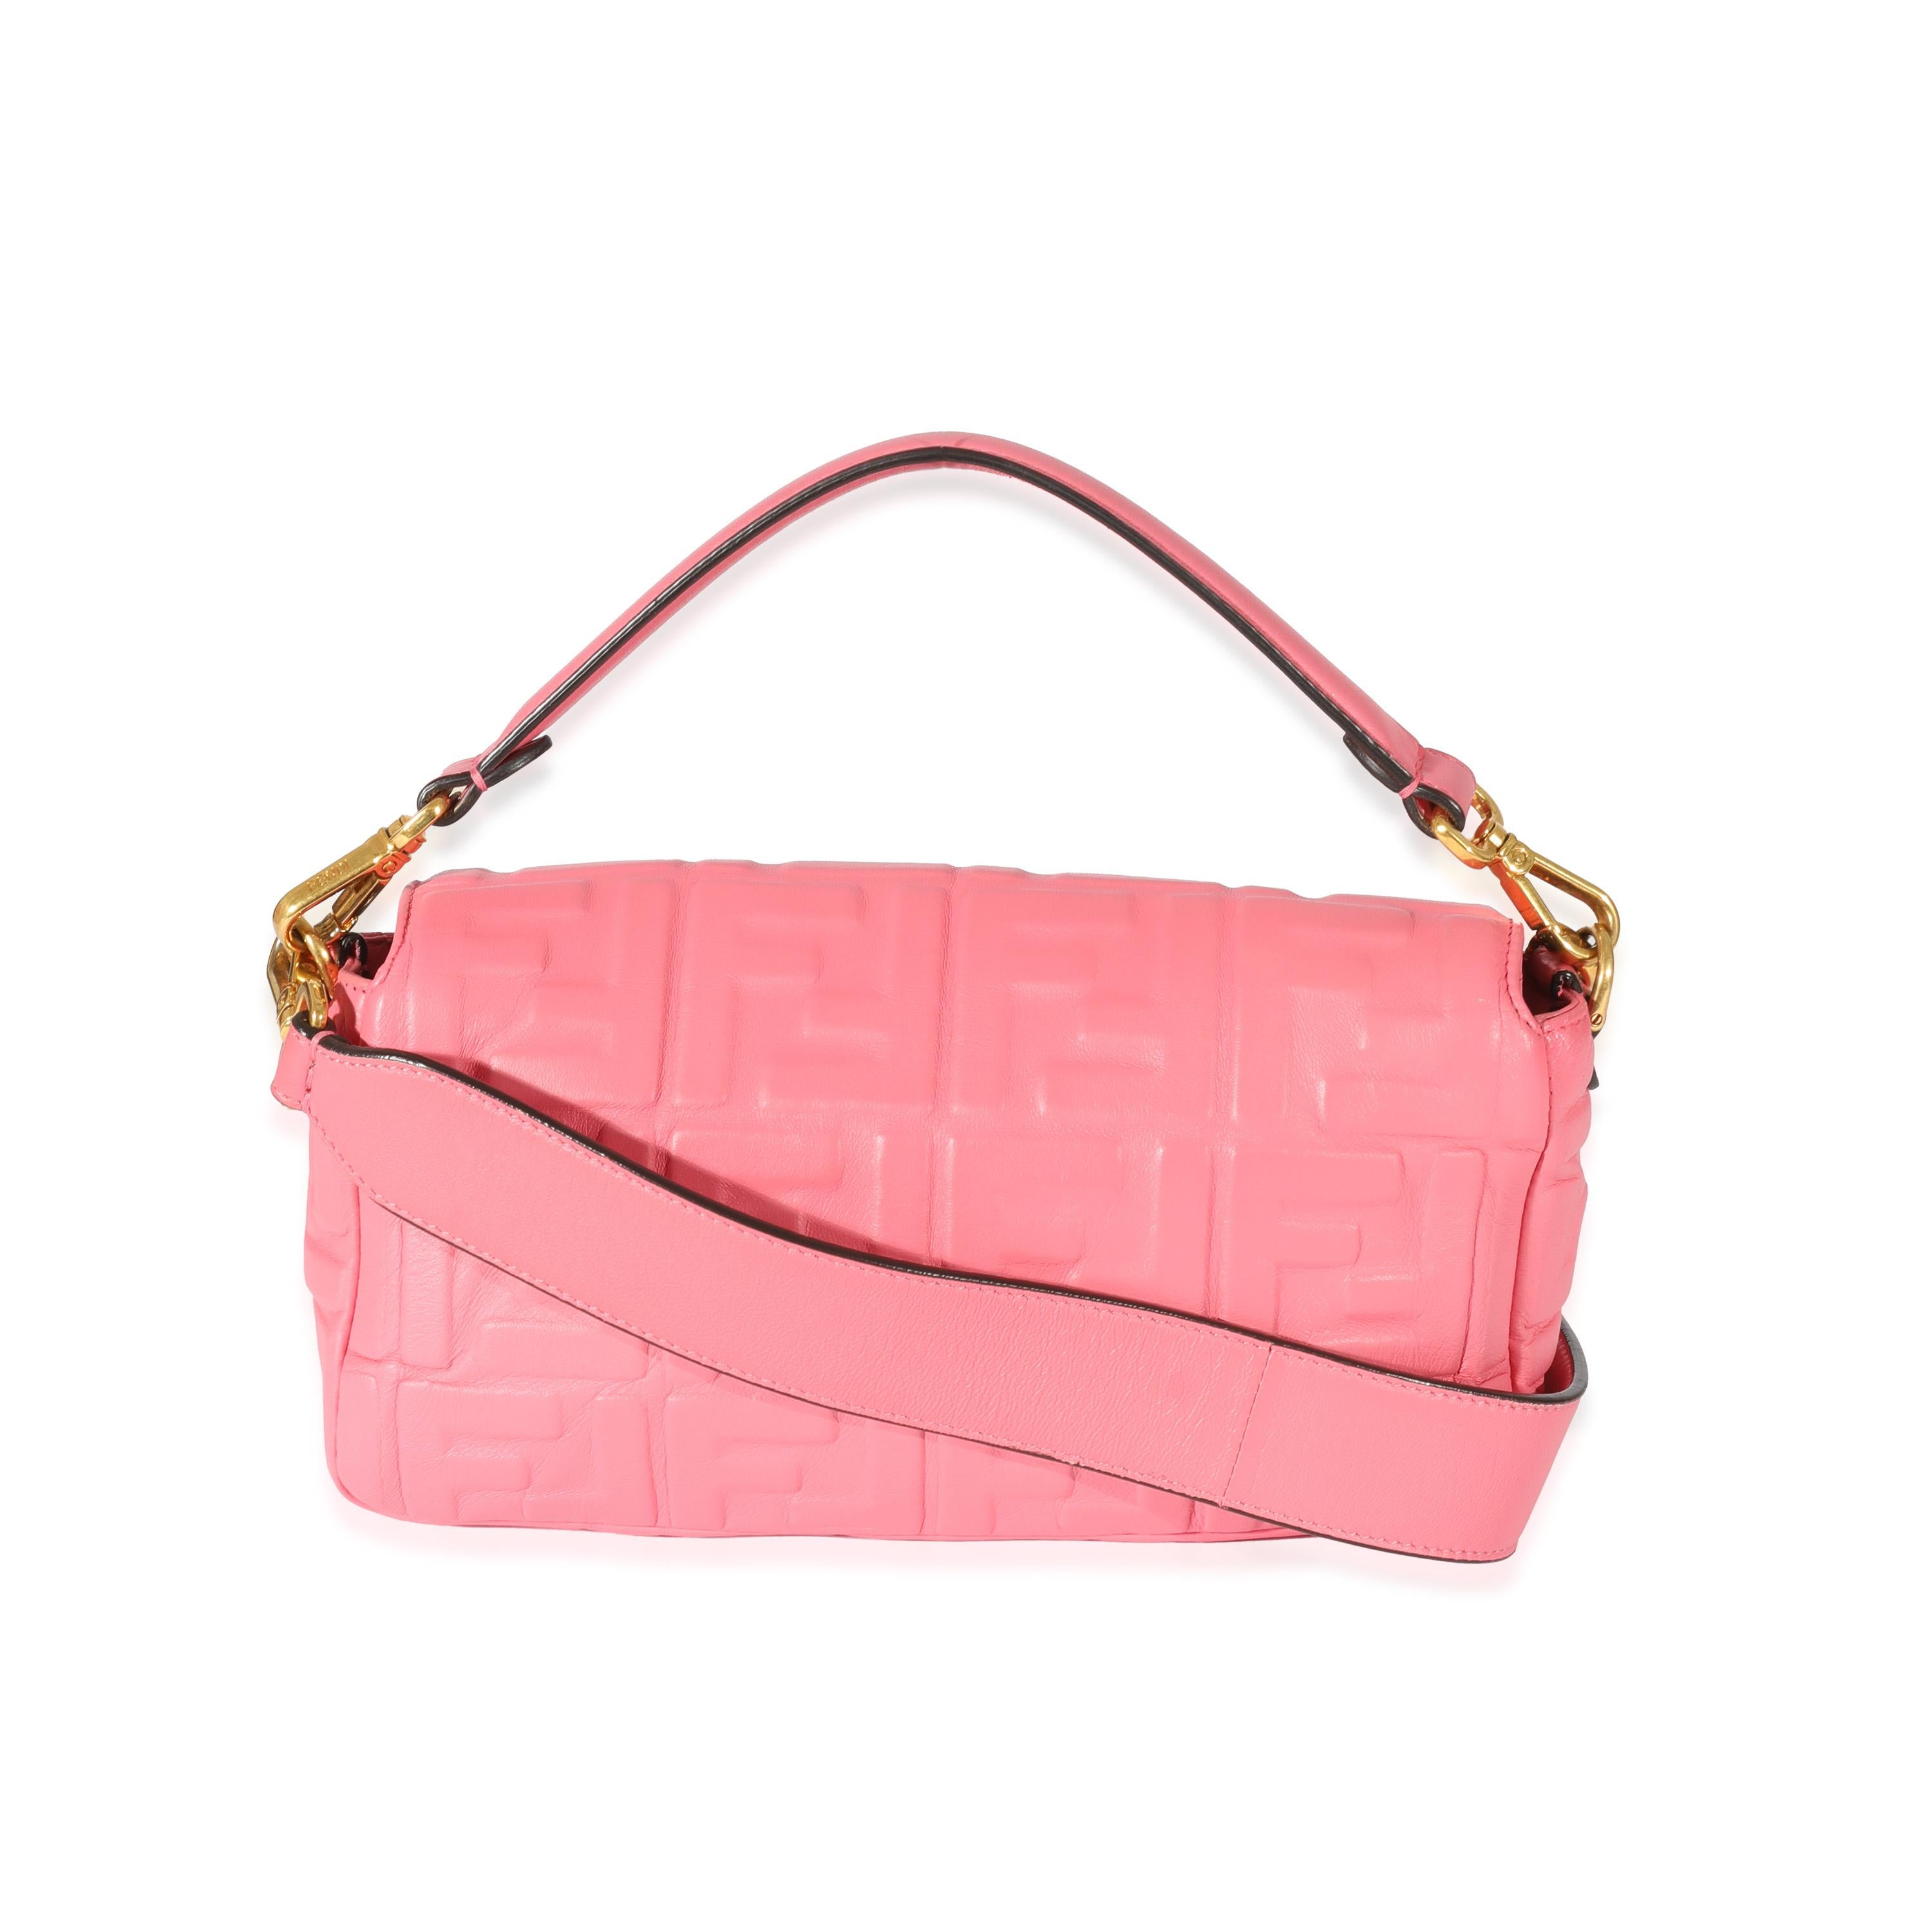 Listing Title: Fendi Pink Leather Zucca Medium Baguette NM
SKU: 129902
Condition: Pre-owned 
Condition Description: A Fendi classic. The Baguette bag is synonymous with the early 2000s and made a name for itself in an early episode of Sex & The